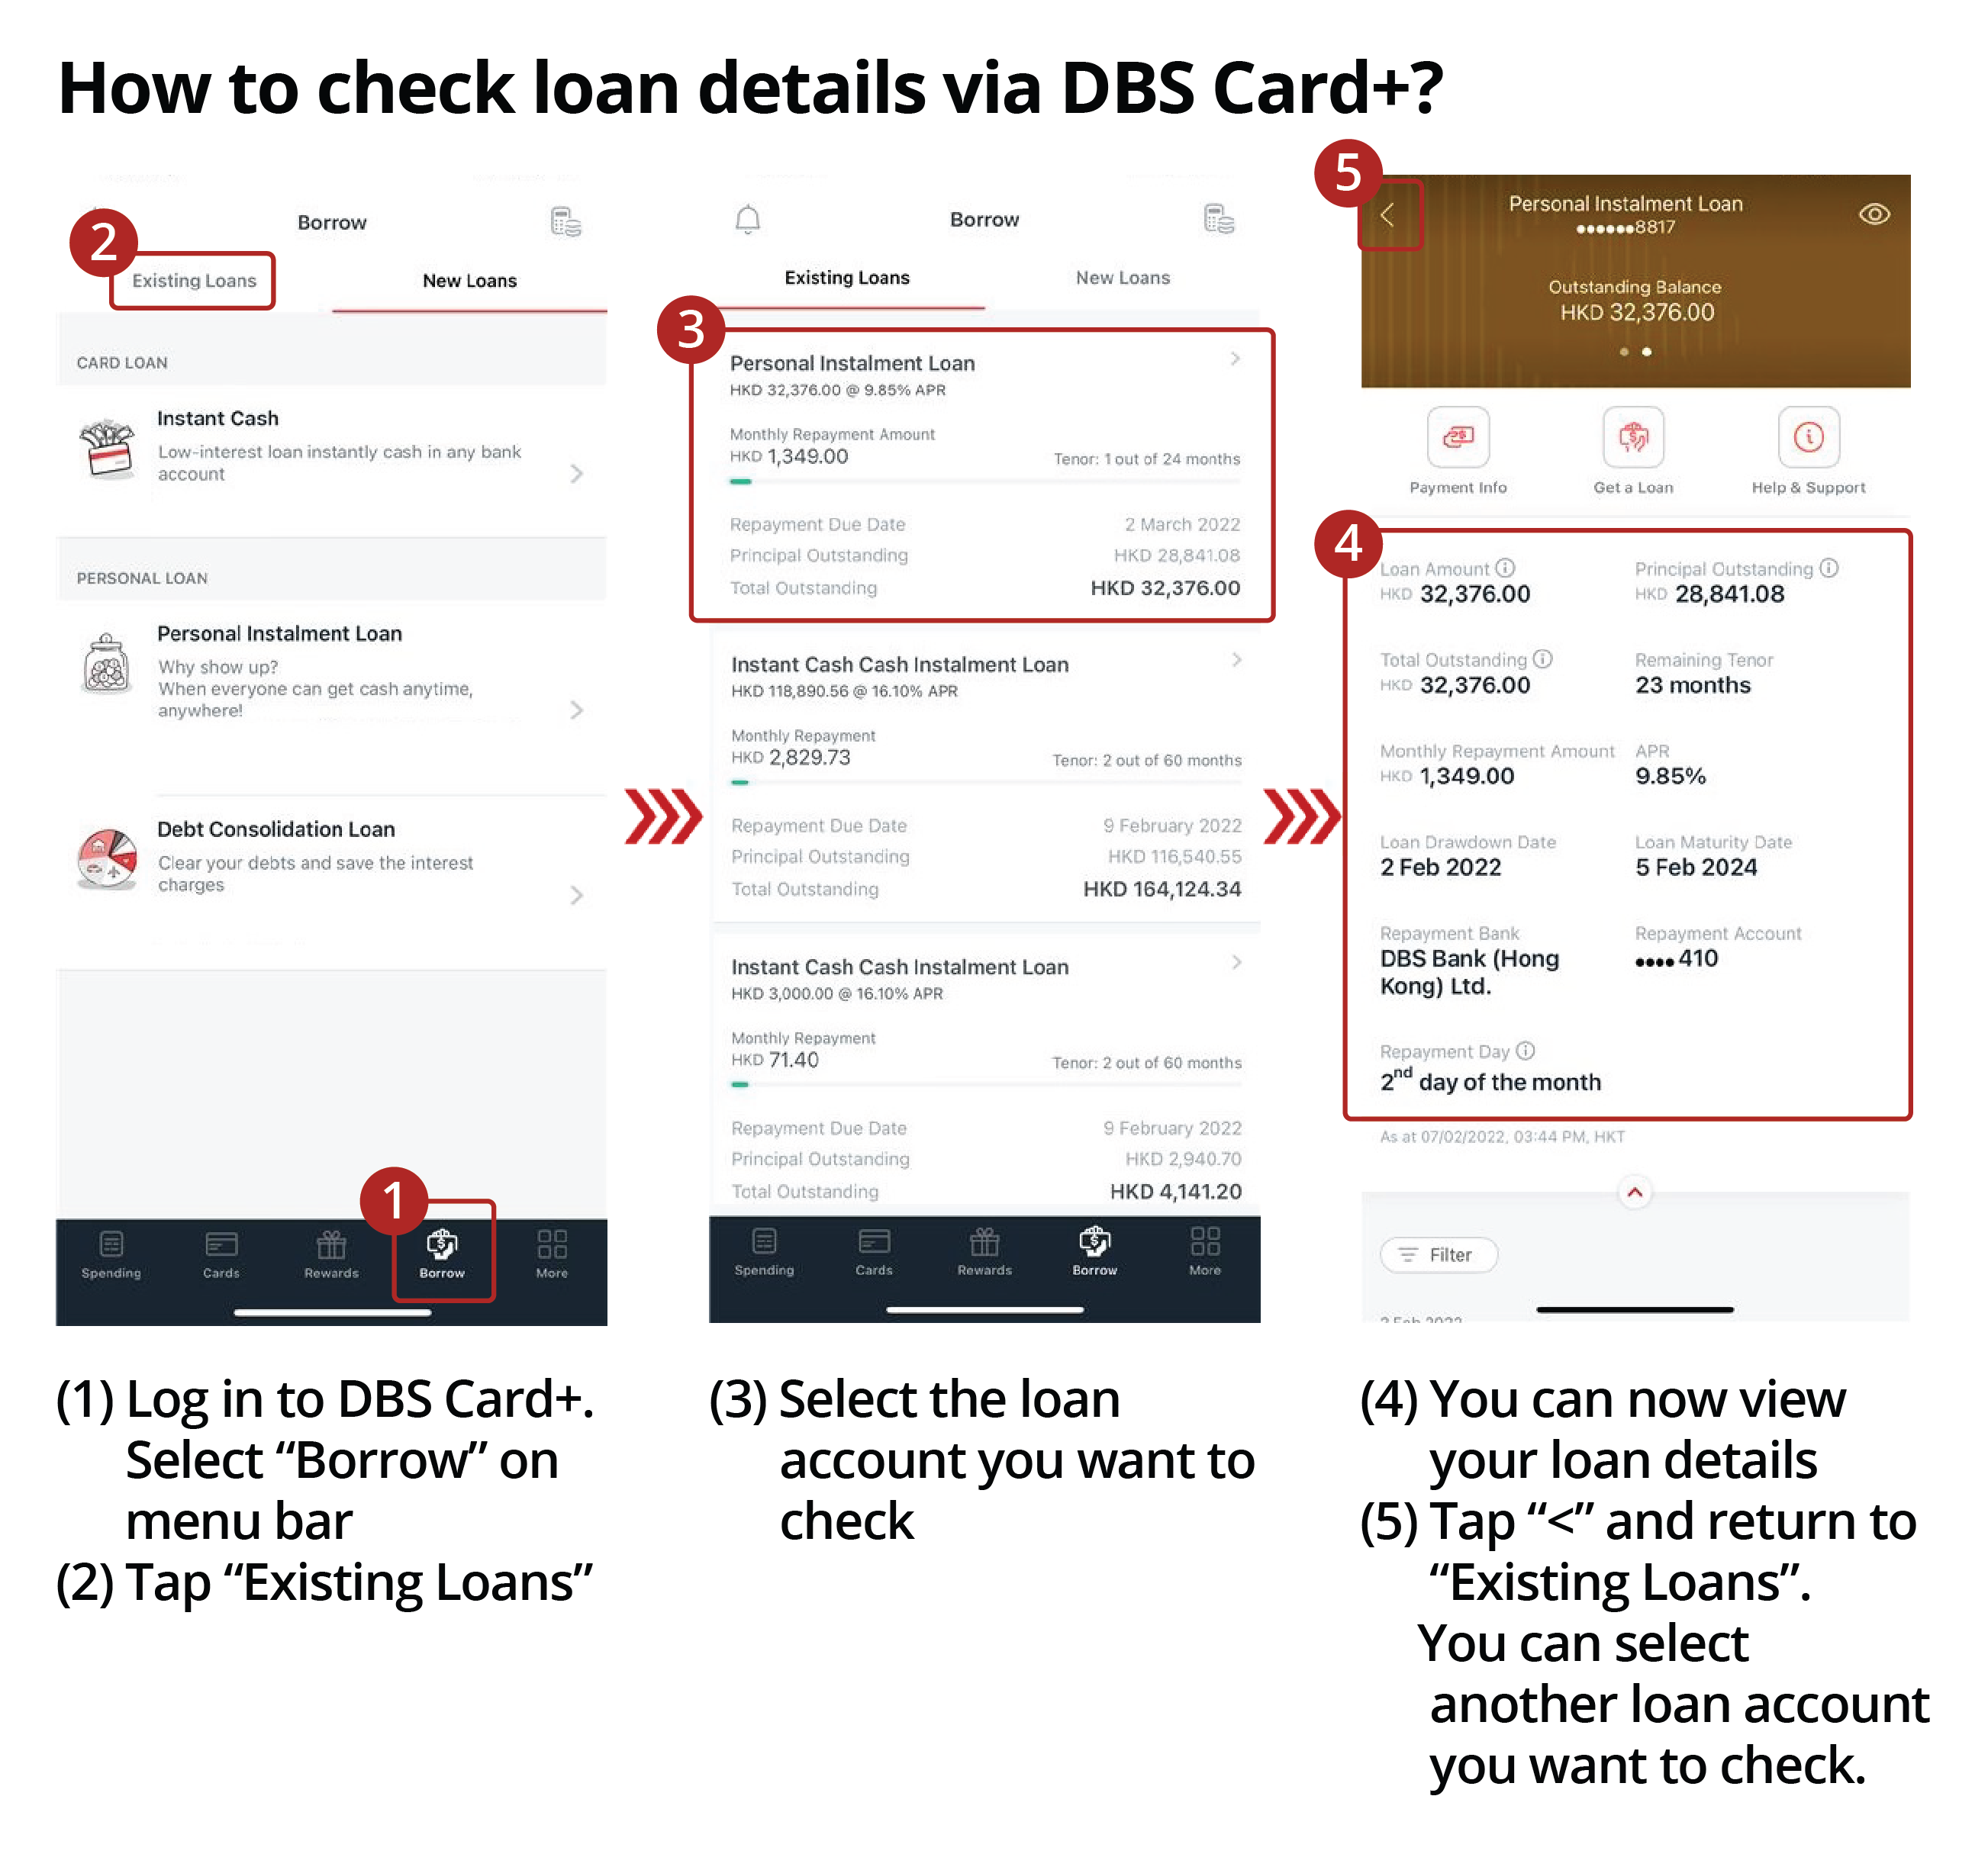 How to check loan details via DBS Card+? 1. Log in to DBS Card+. 2. Tap “Existing Loans”.3. Select the loan account you want to check. 4. You can now view your loan details Select “Borrow” on menu bar. 5.Tap “<” and return to “Existing Loans”. You can select another loan account you want to check.